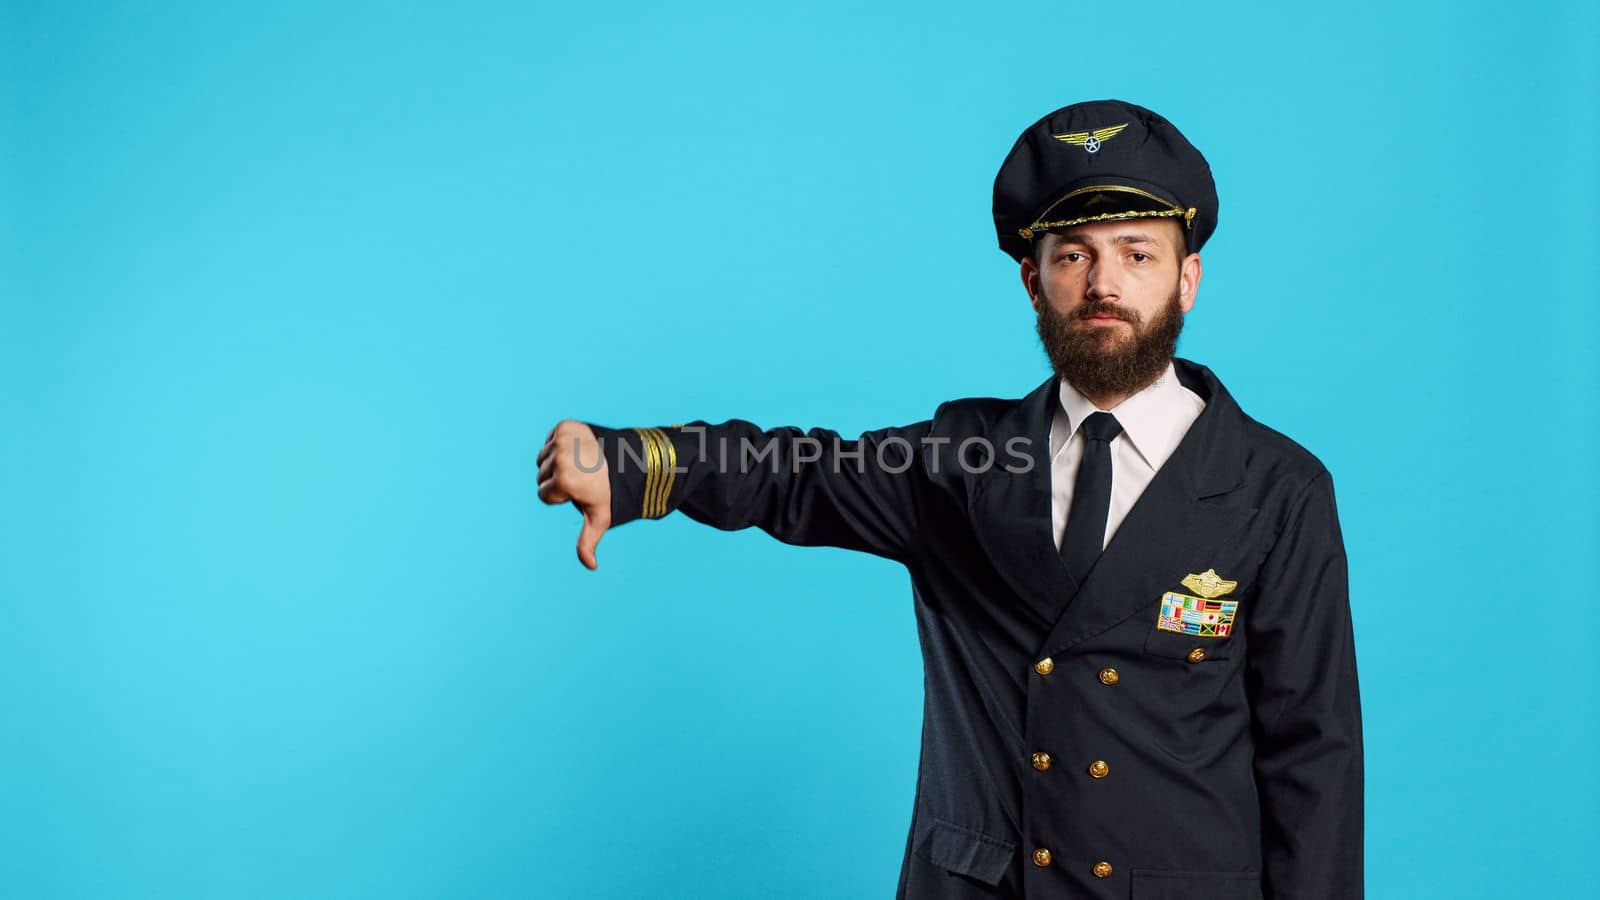 Professional aviator showing thumbs down sign by DCStudio